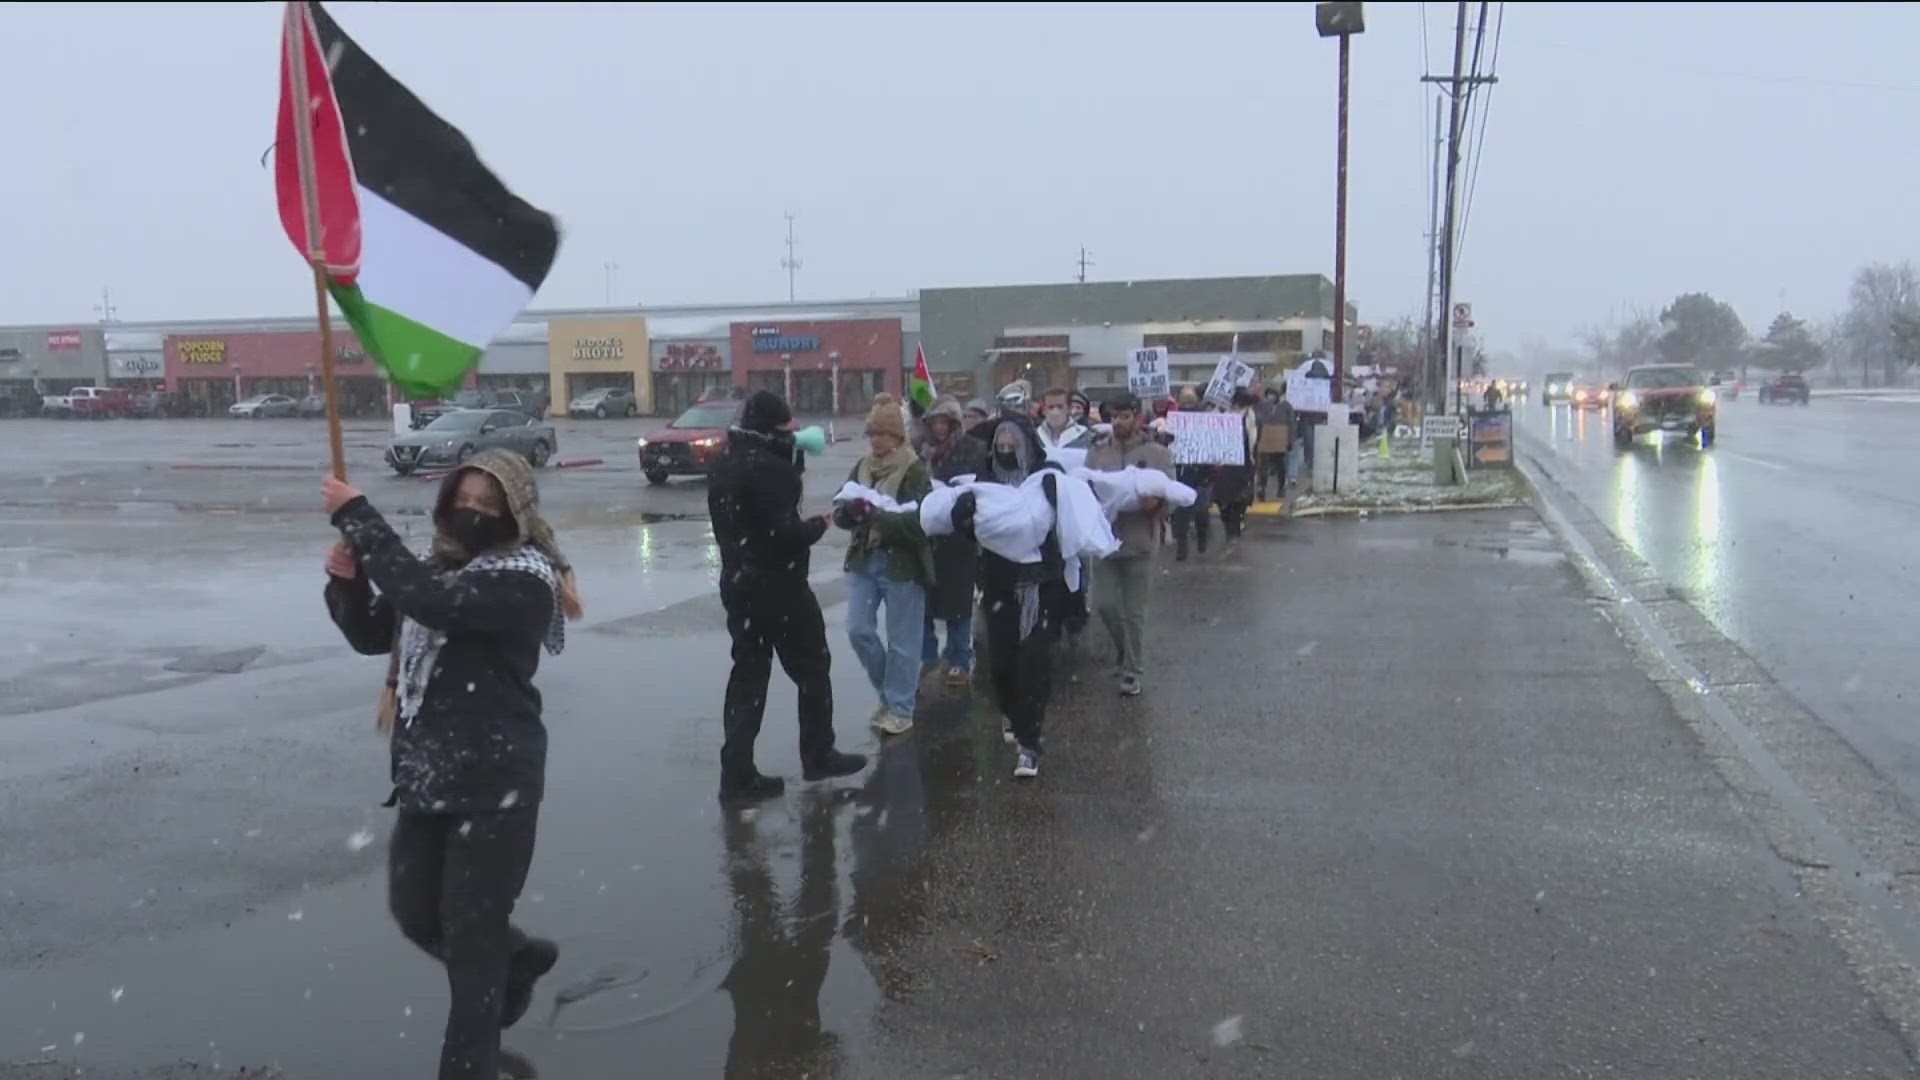 Boise to Palestine organized Saturday's rally on Chinden Boulevard.